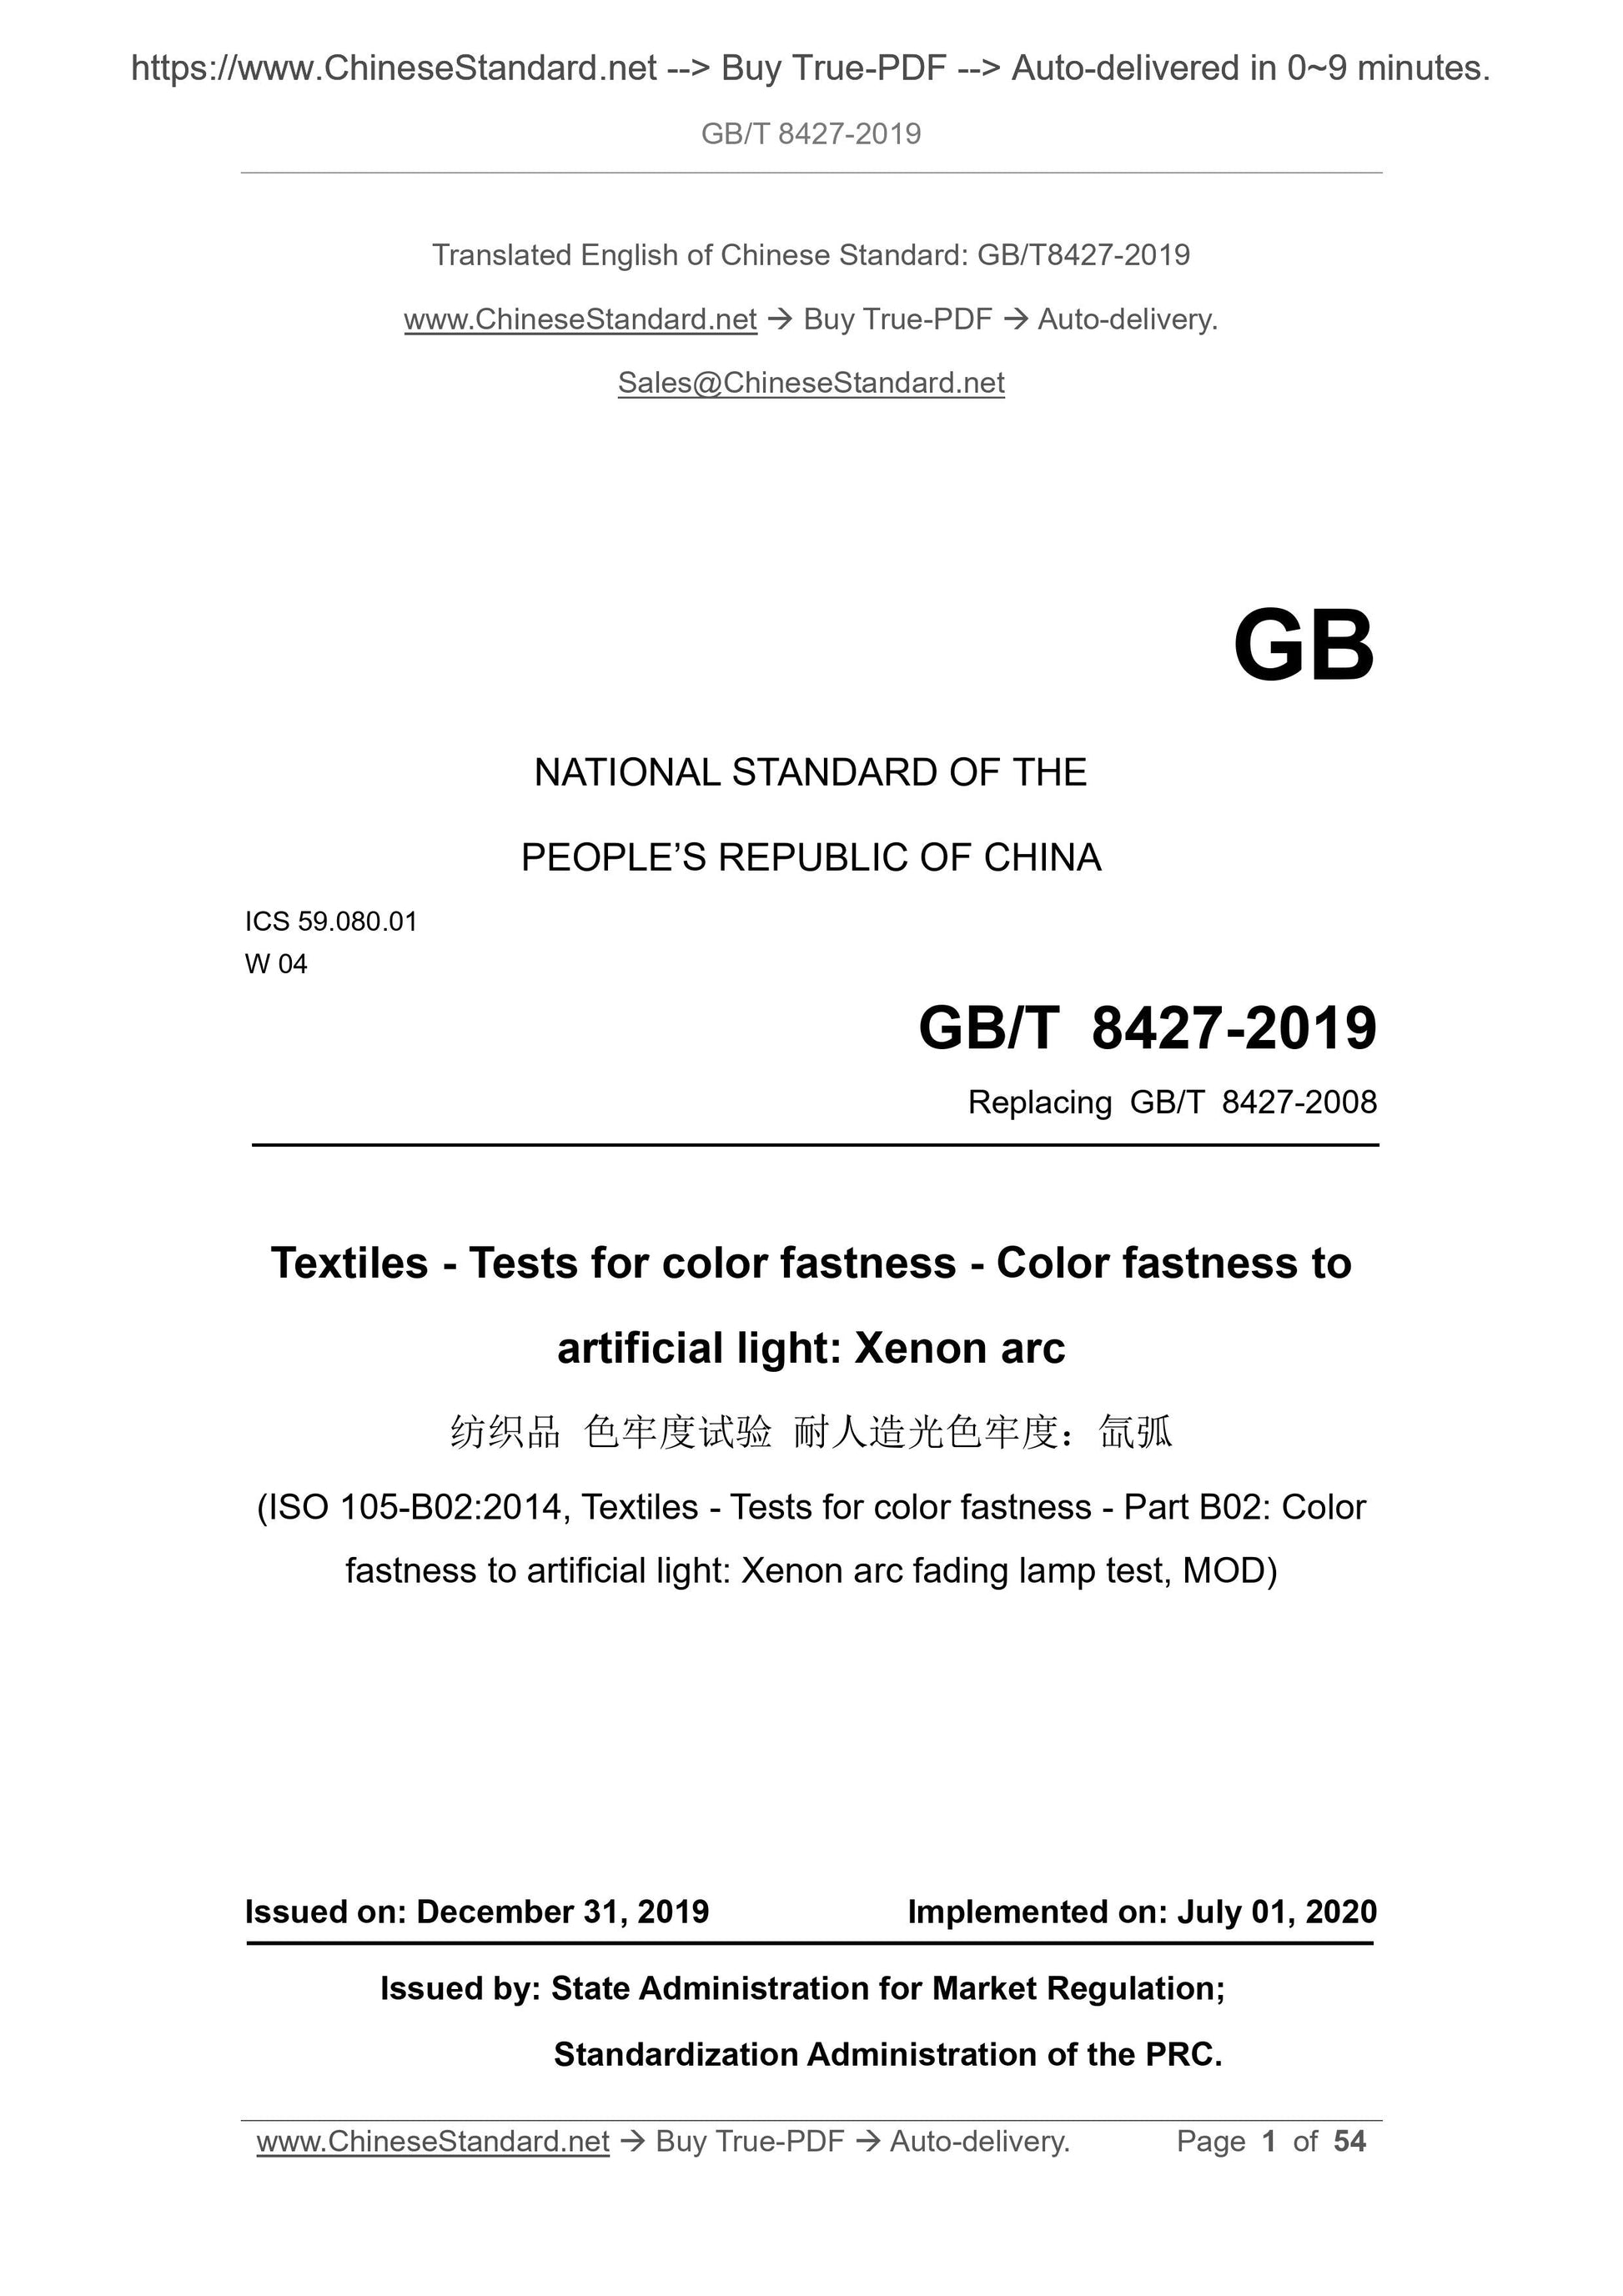 GB/T 8427-2019 Page 1